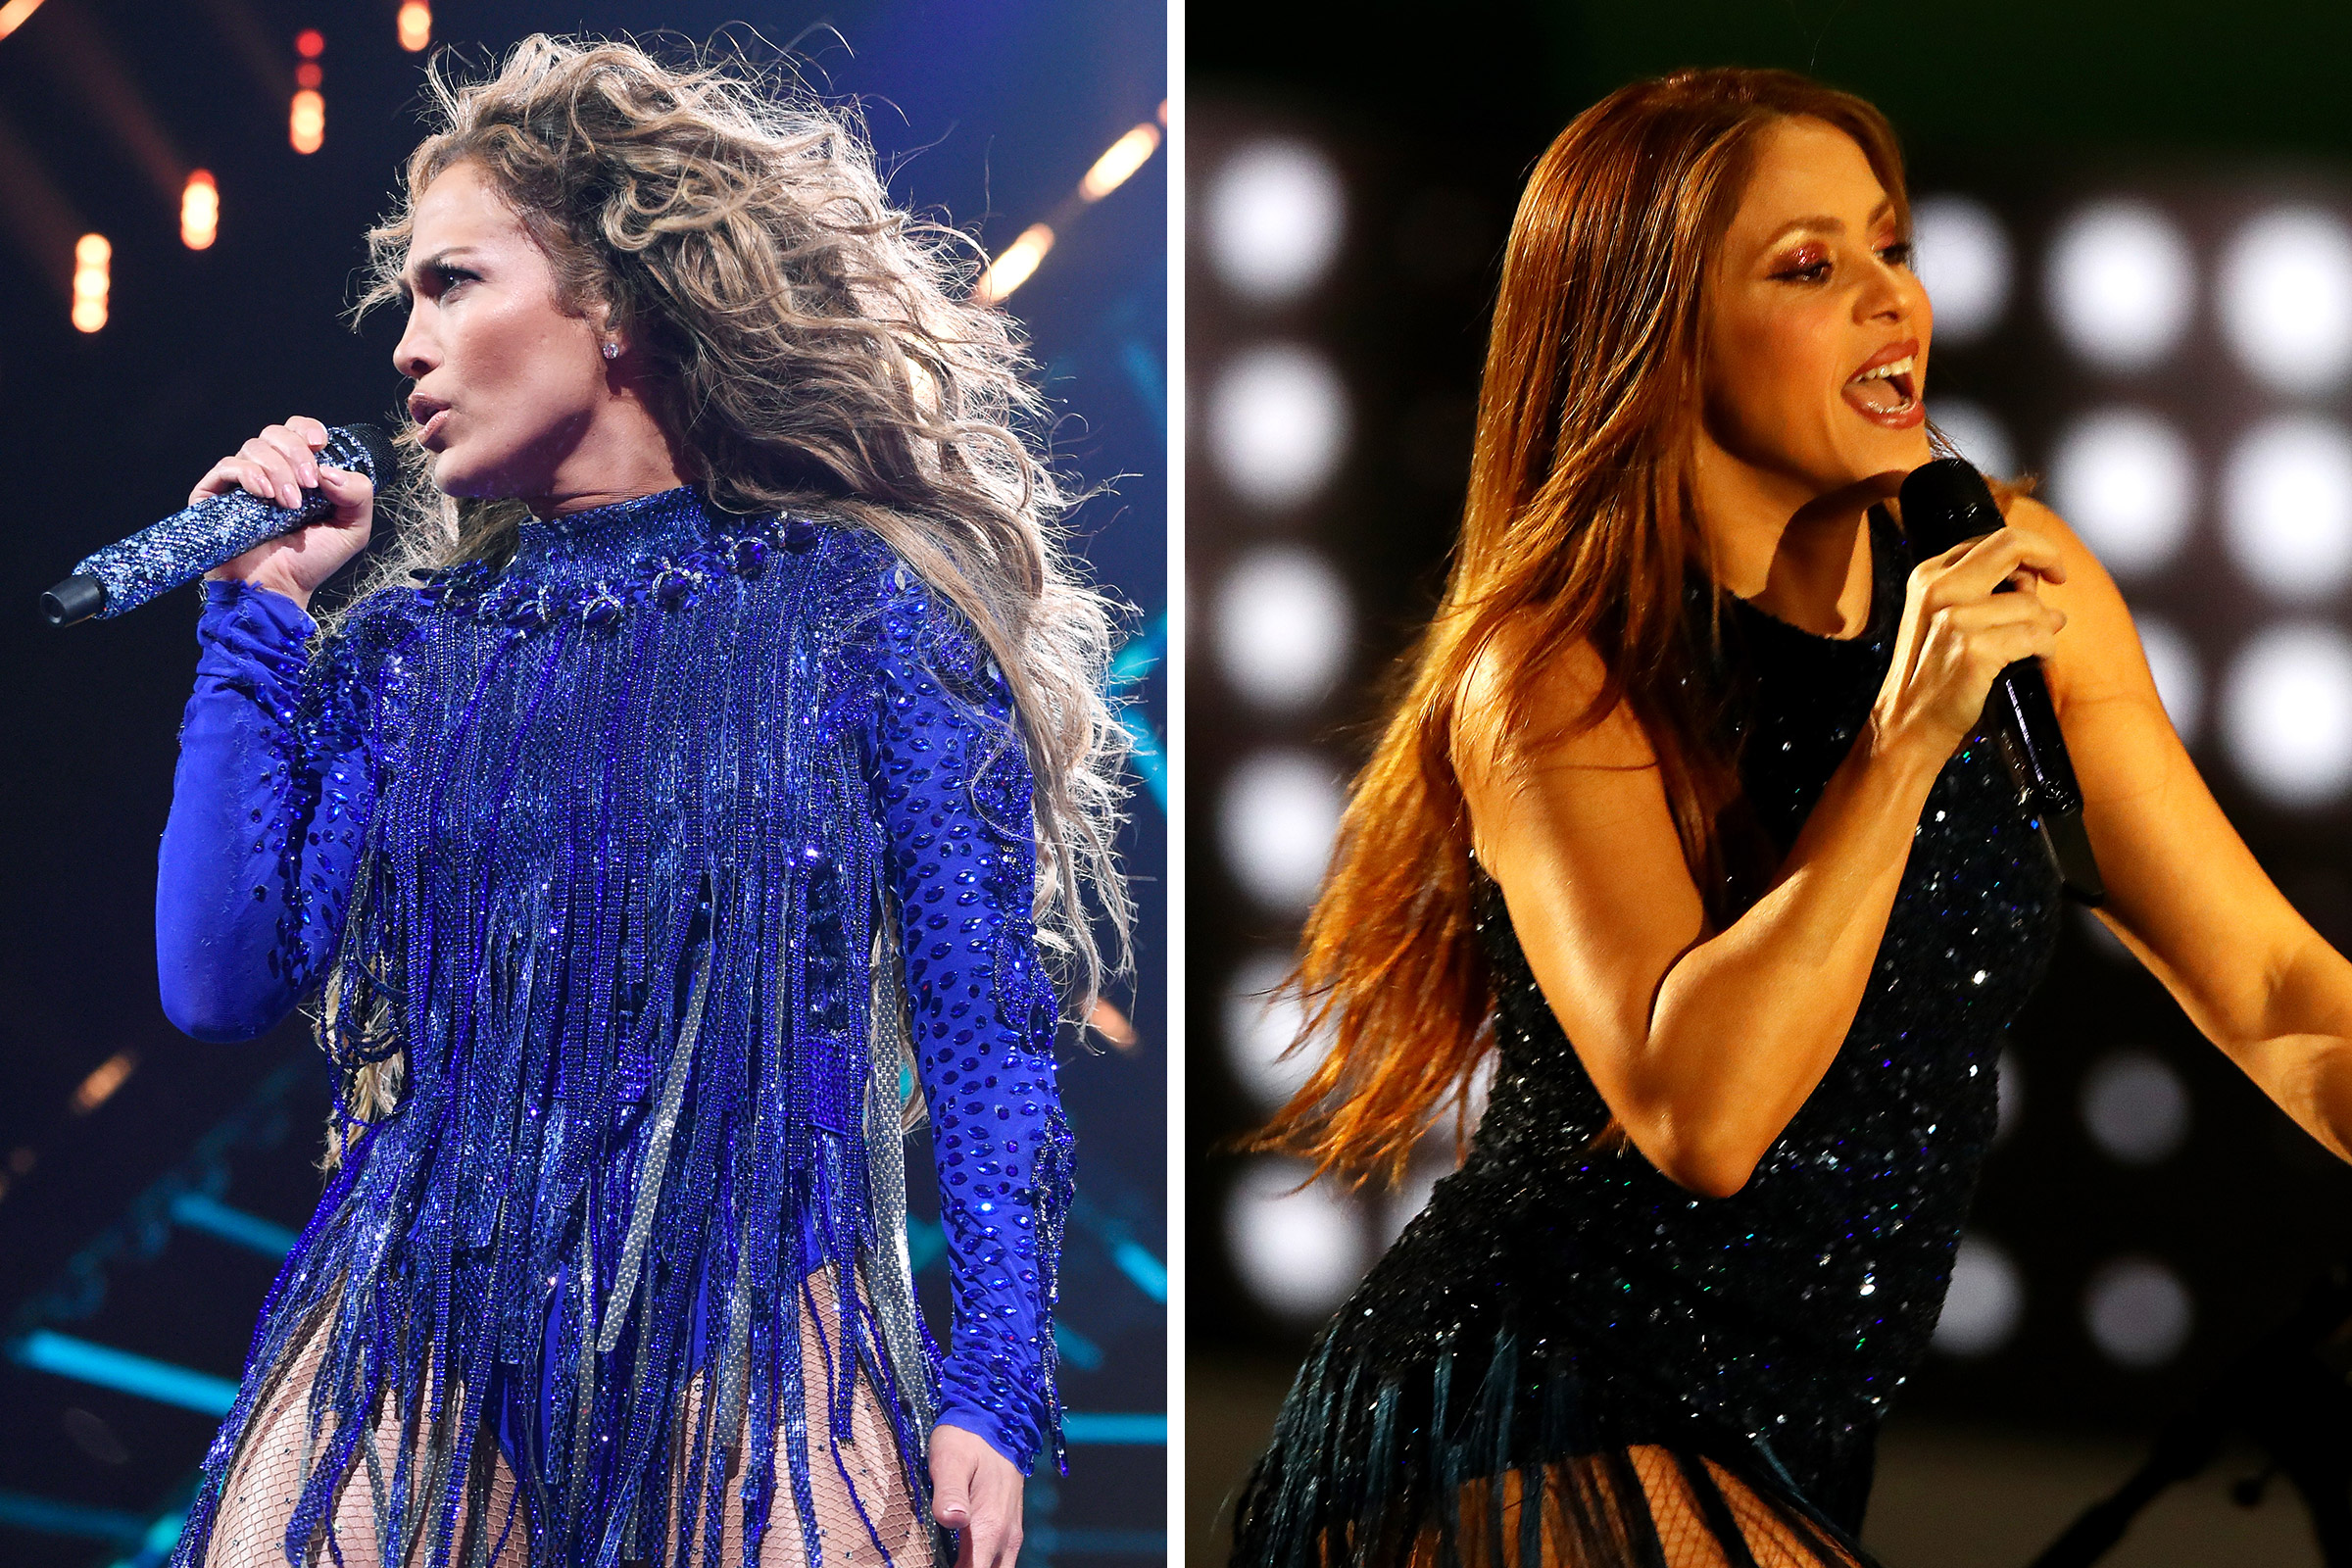 Jennifer Lopez and Shakira's Super Bowl Show: What to Expect